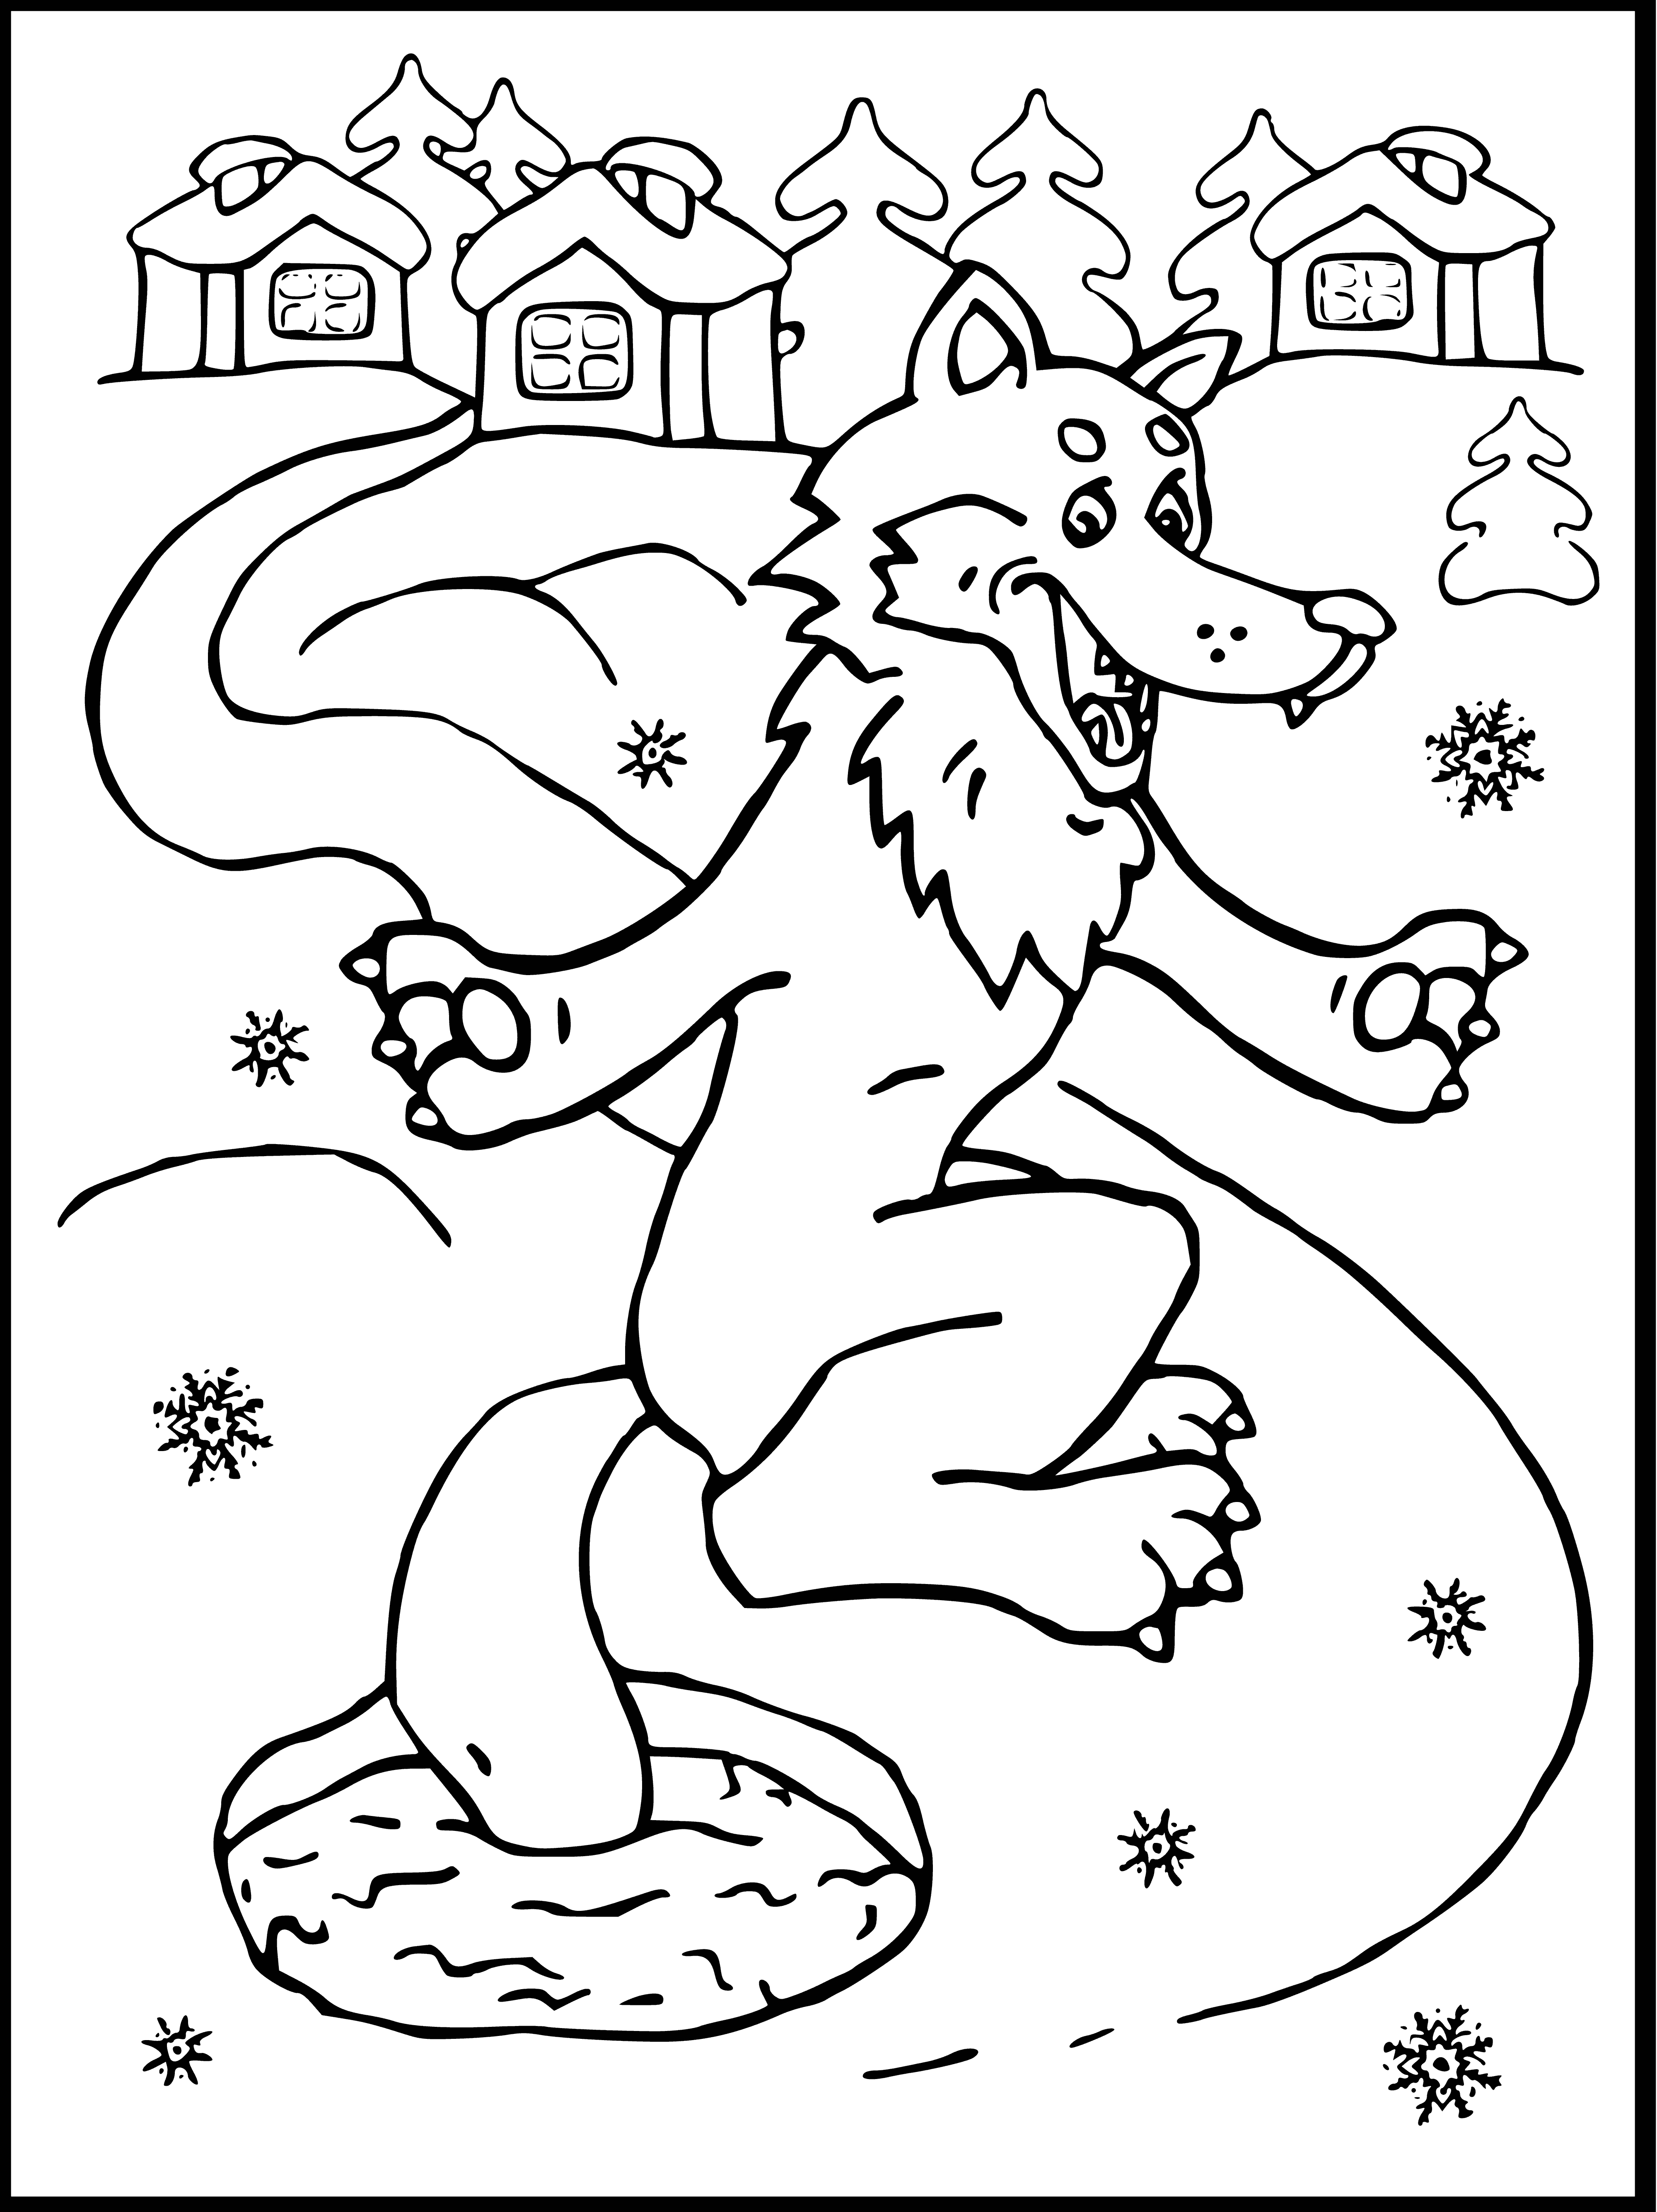 Wolf fishing coloring page